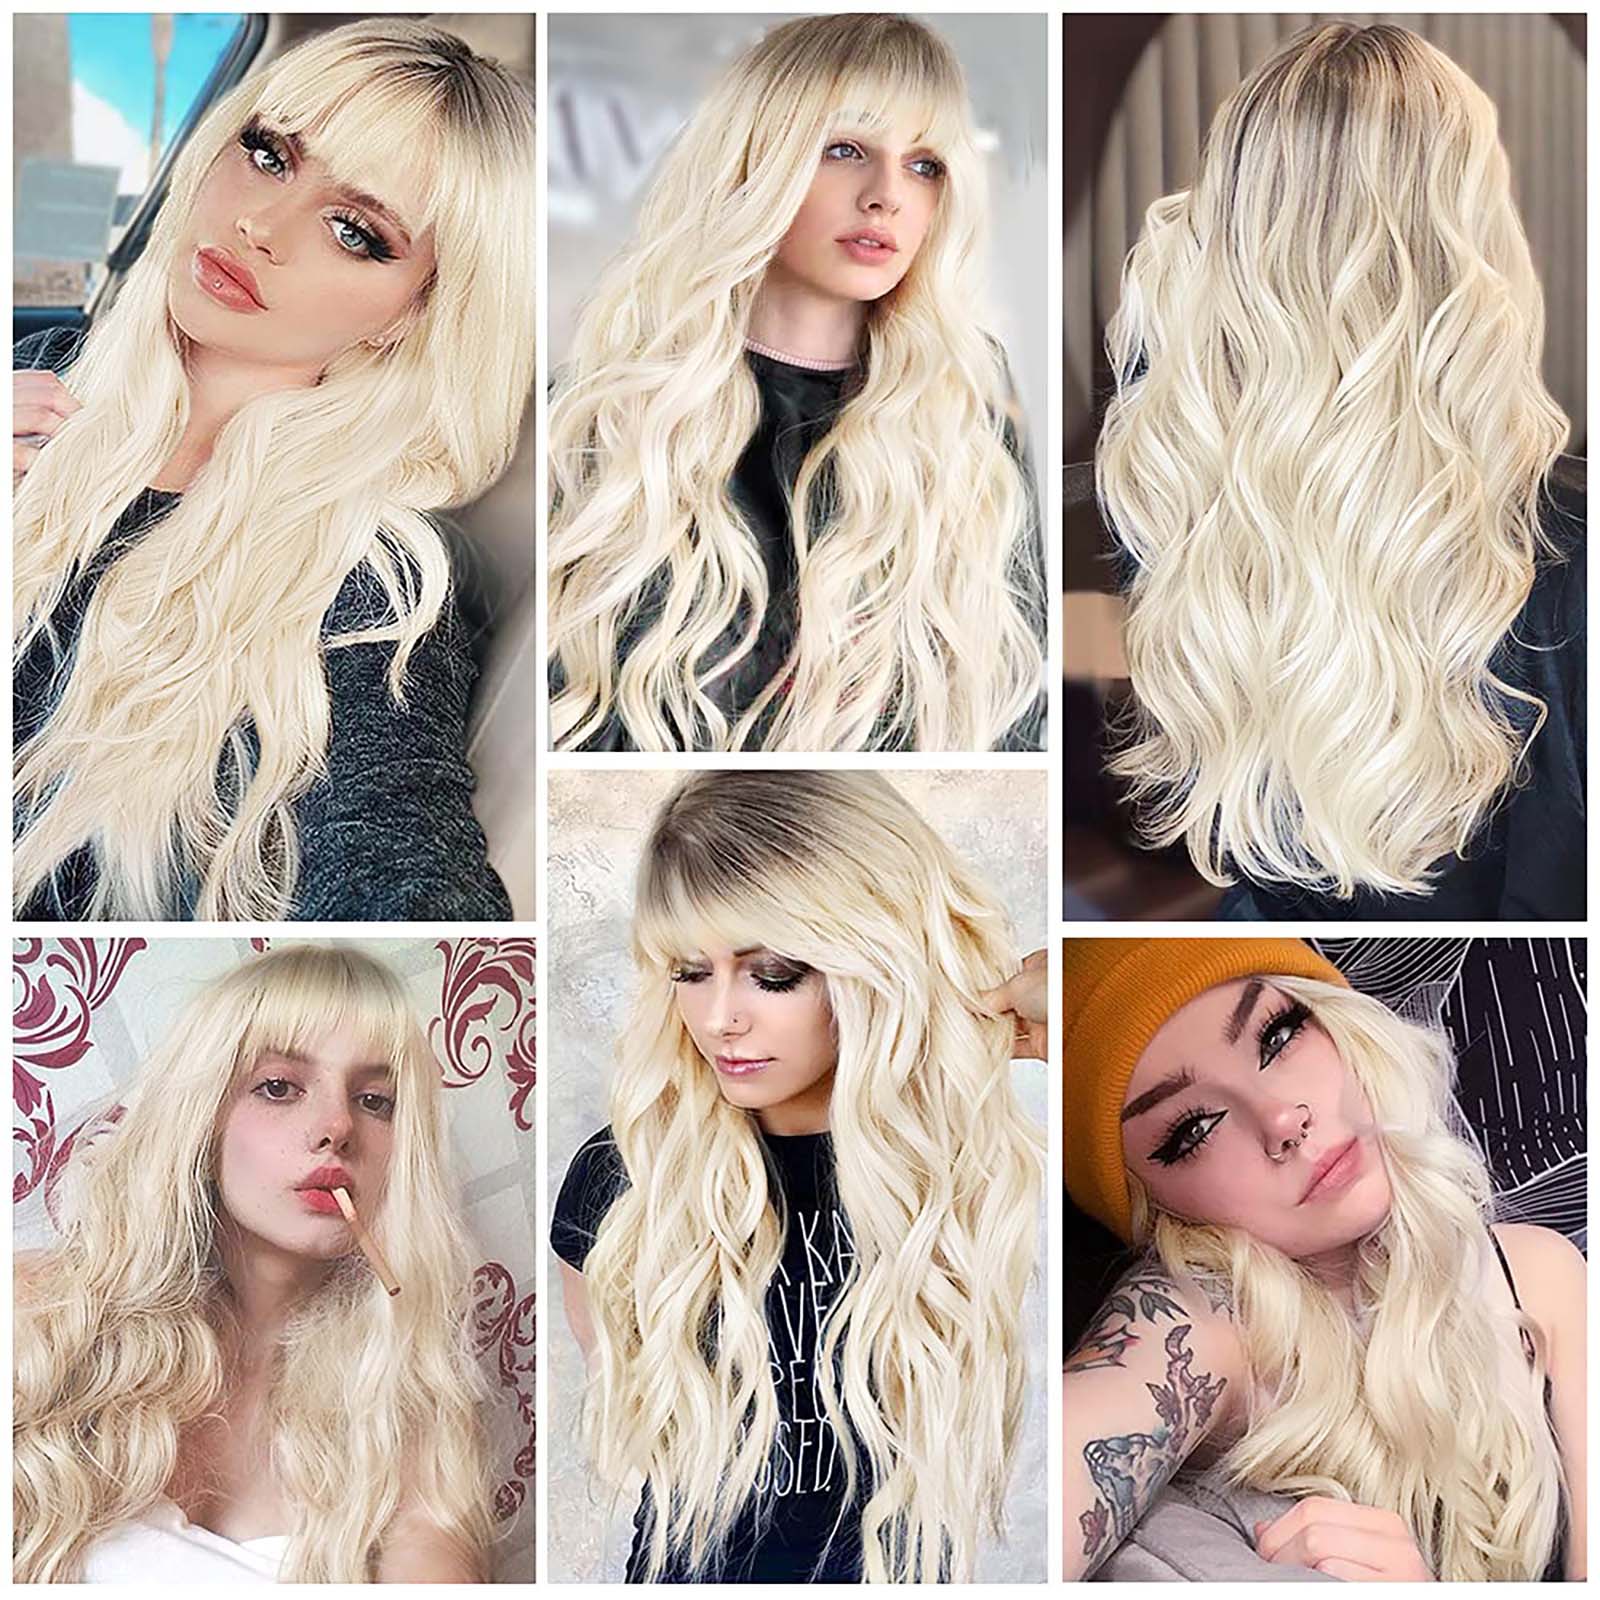 LINGDORA Long Ombre Platinum Blonde Water Curly Wig with Bangs for Women Fashion Charming Wavy Hair